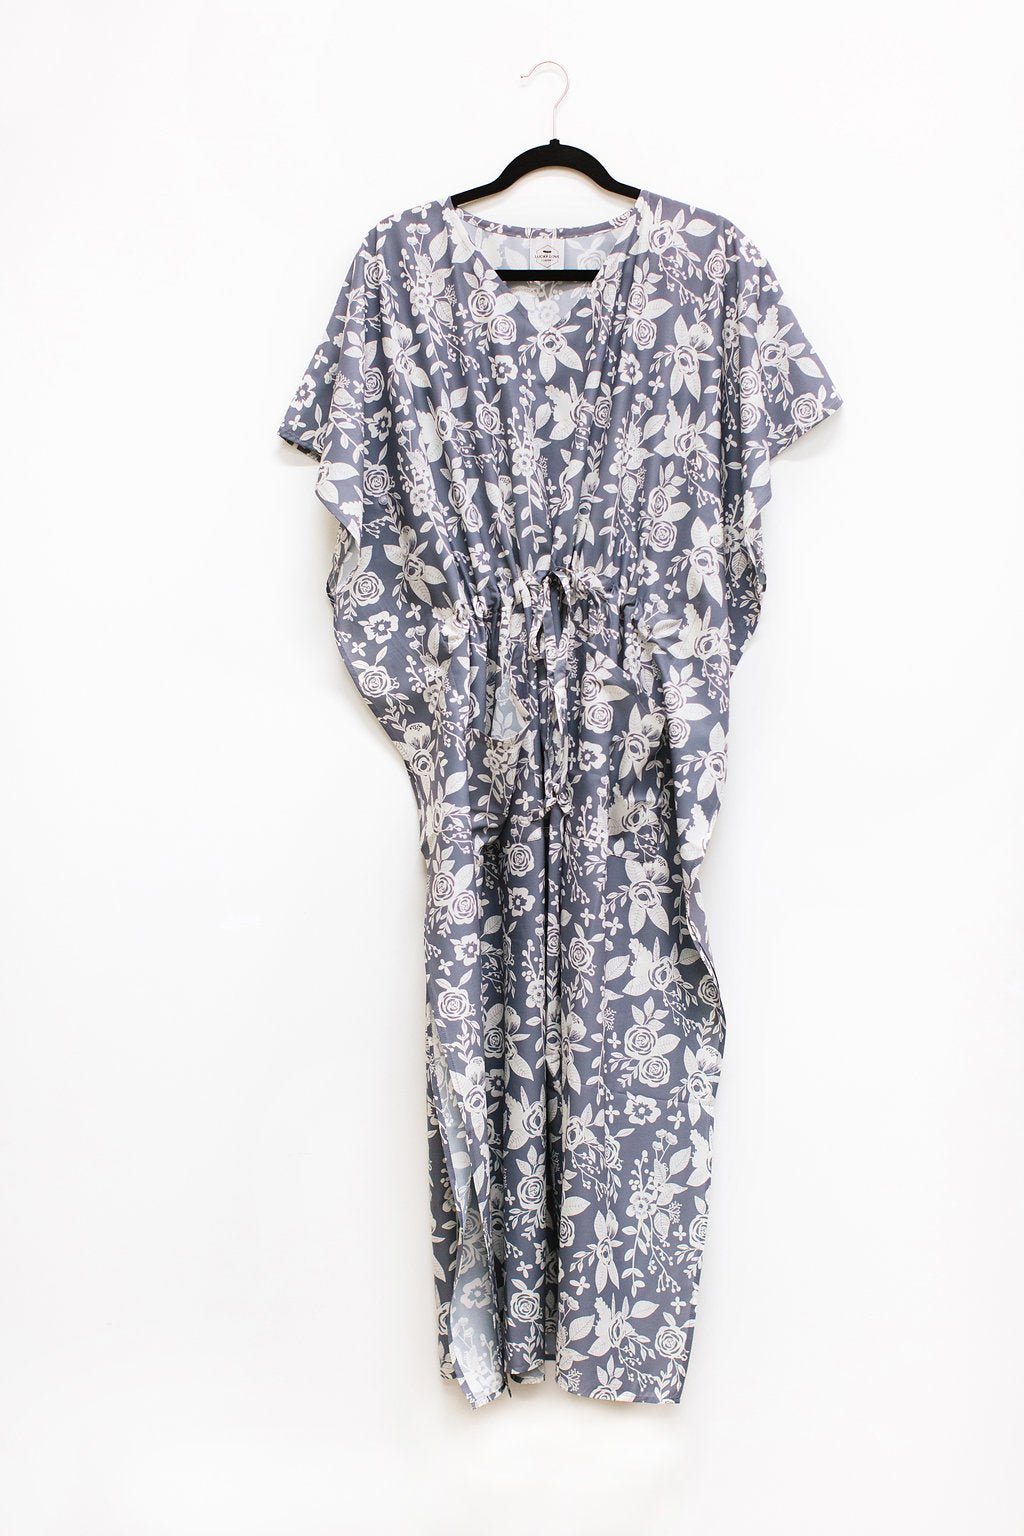 SOPHIE House Dress / Lightweight Soft Synthetic Silk / Effortless and Easy